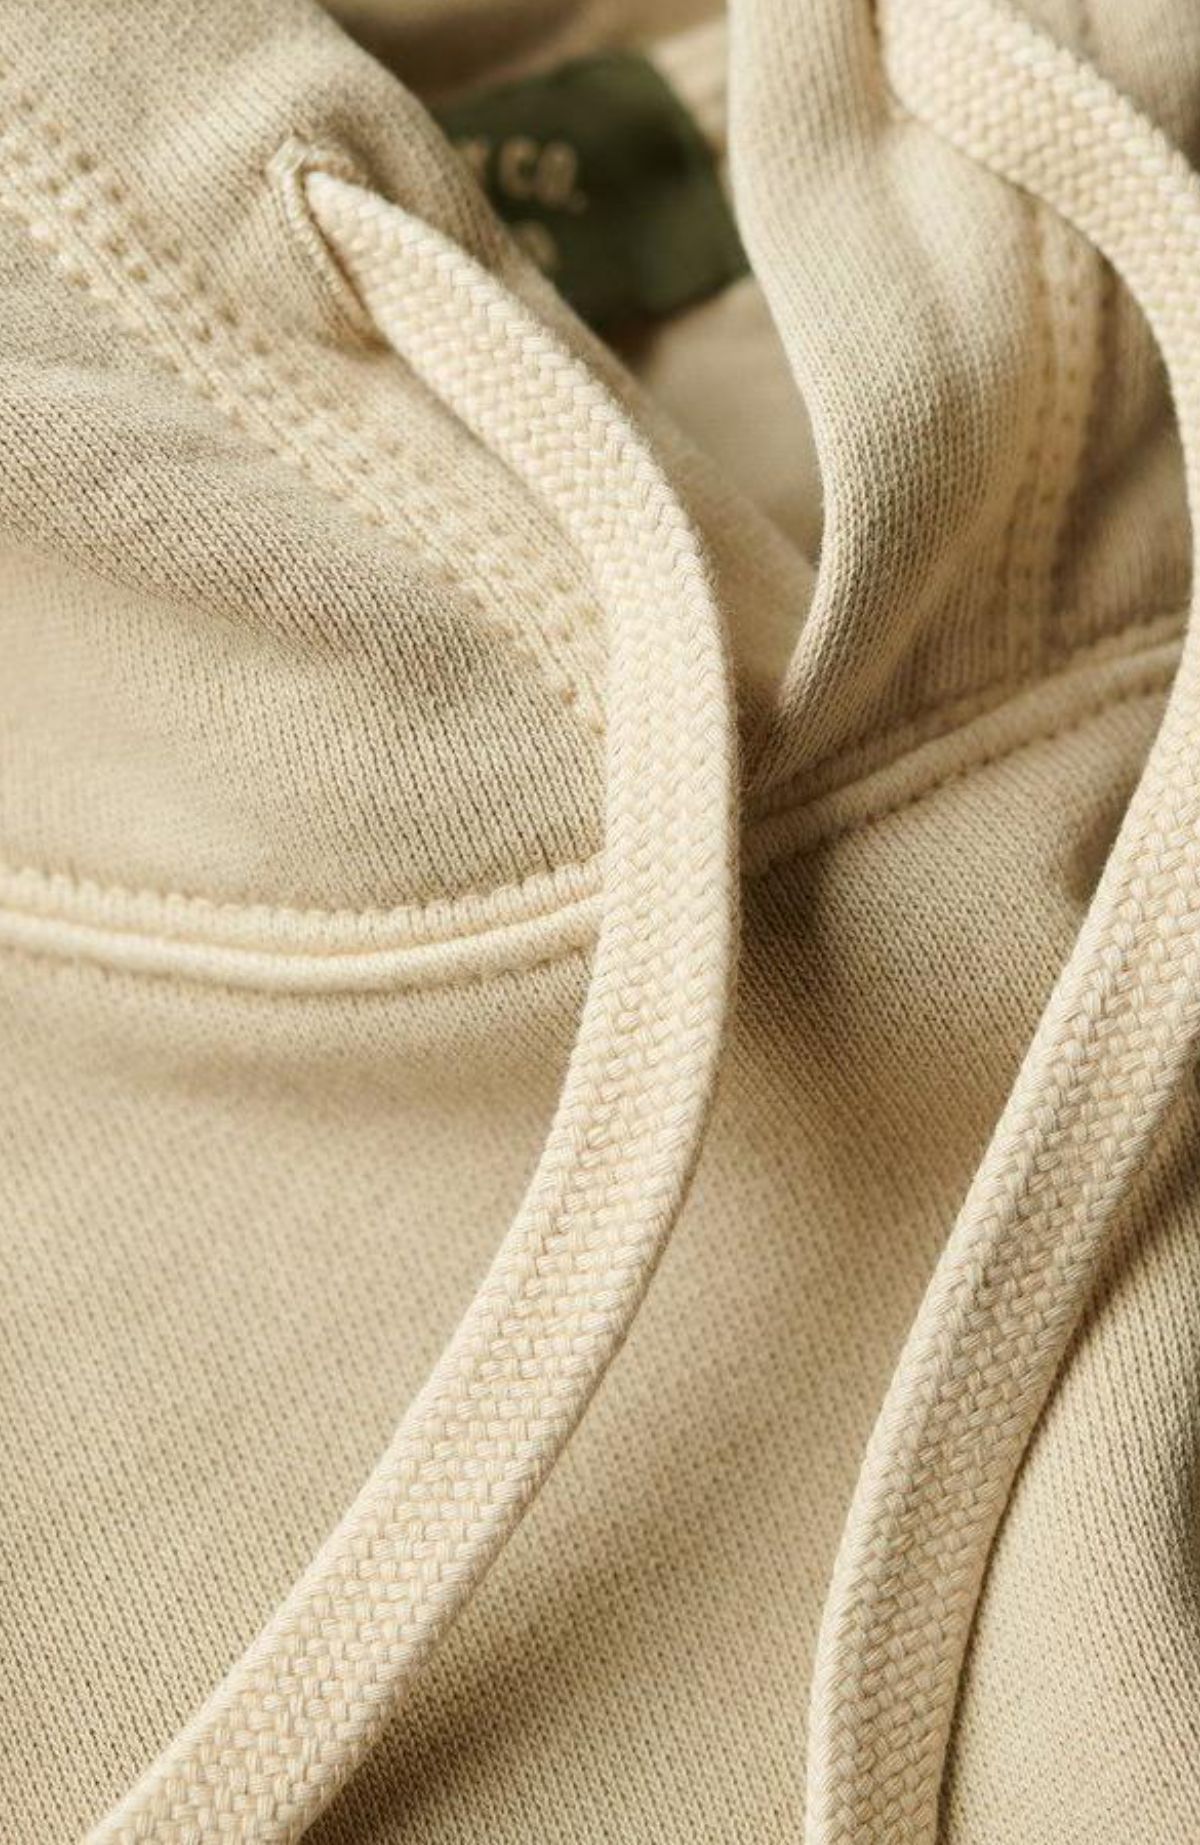 Contrast Stitch Relaxed Hoodie